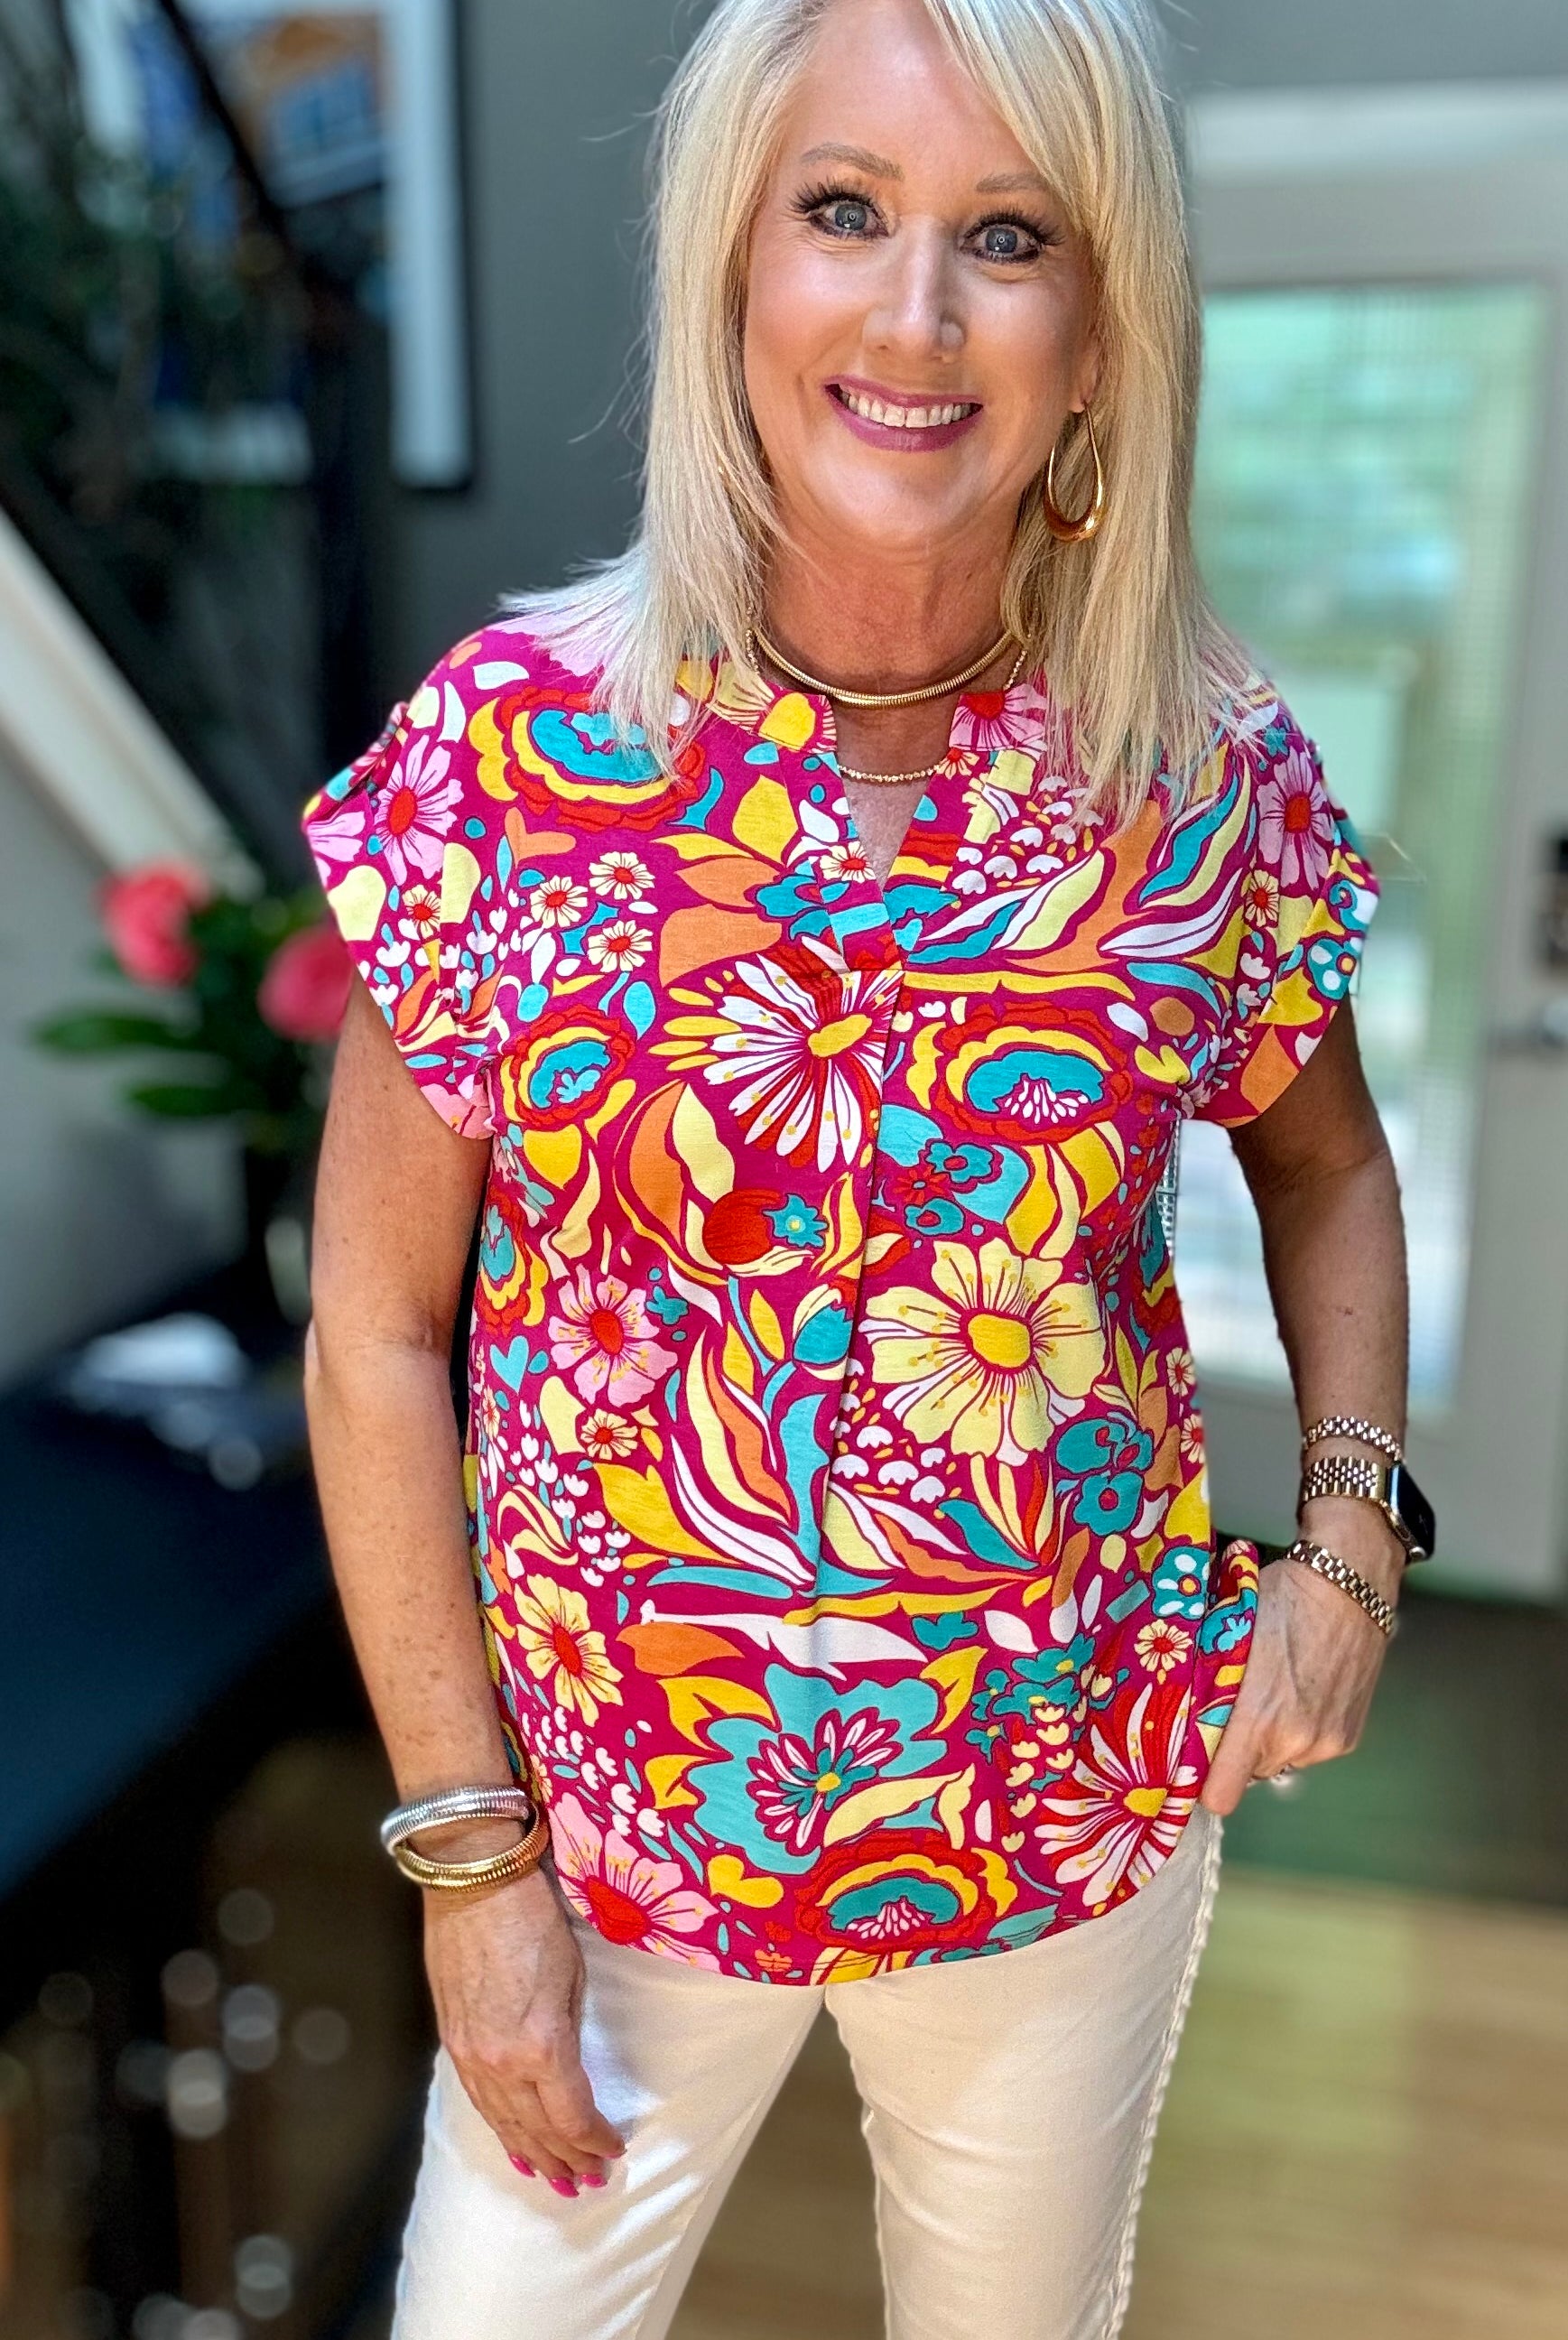 Lizzy Cap Sleeve Top Magenta and Pink Multi Floral-Short Sleeves-Ave Shops-Urban Threadz Boutique, Women's Fashion Boutique in Saugatuck, MI